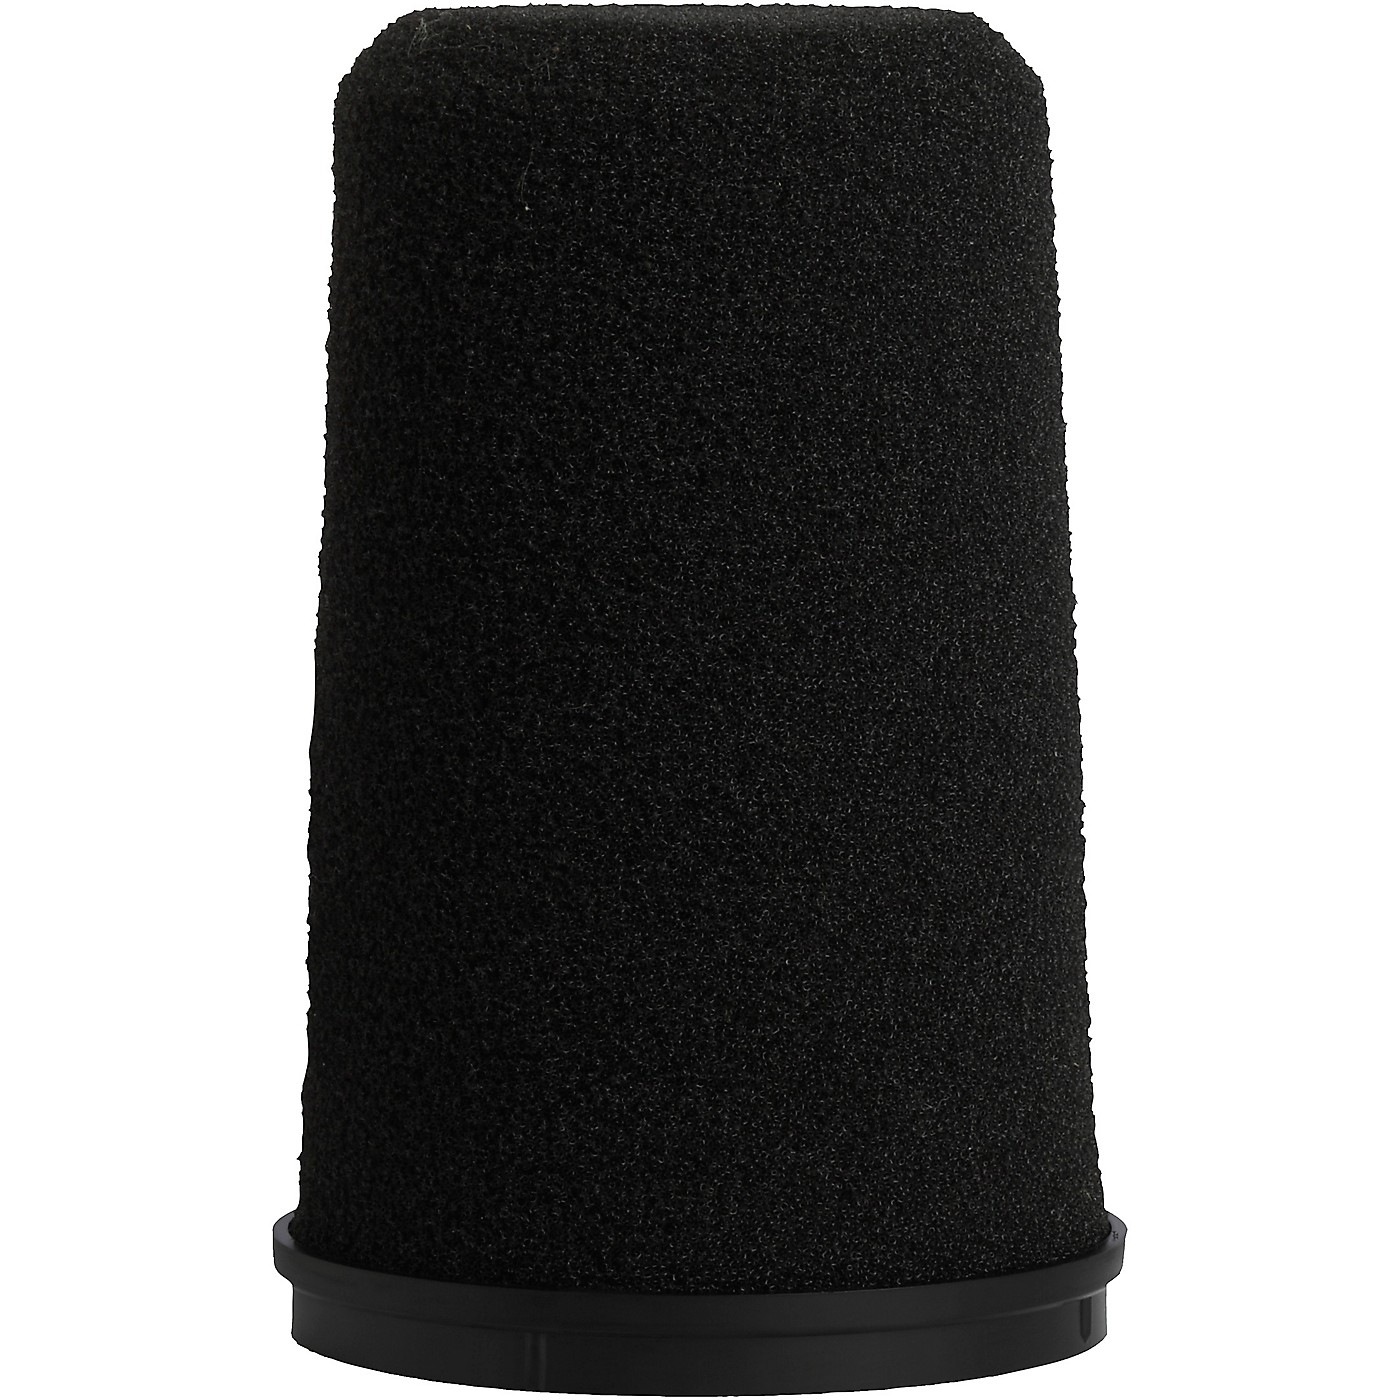 Shure RK345 Black Replacement Windscreen for SM7 models thumbnail